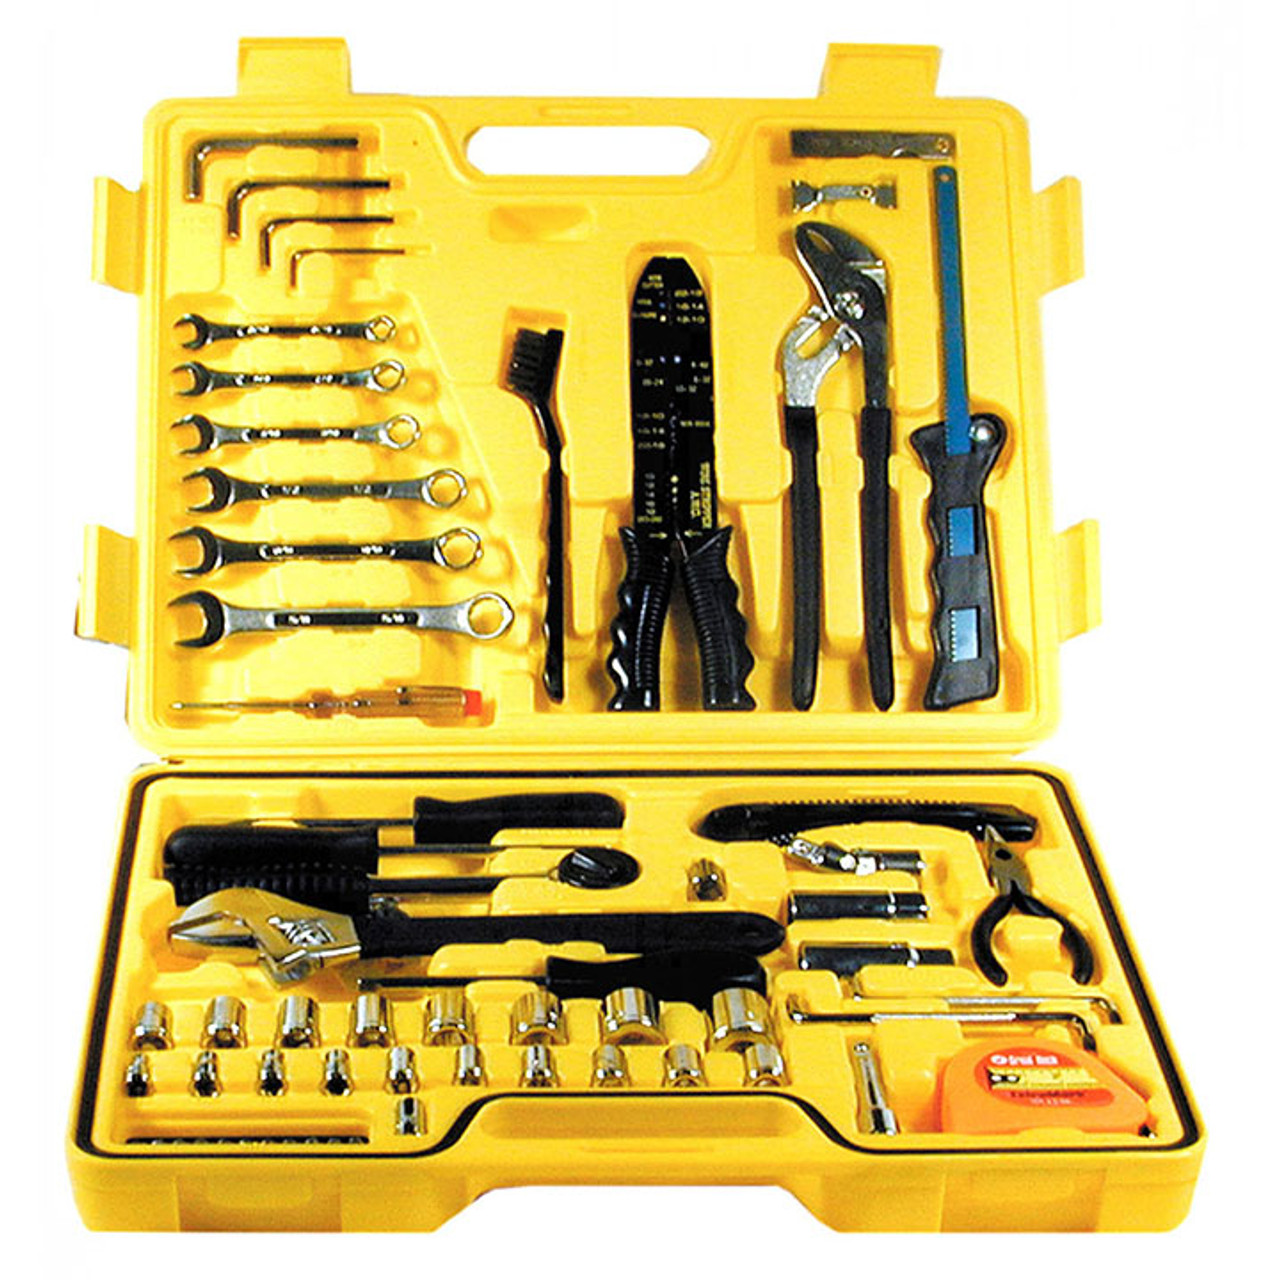 Greatneck MS125 Great Neck Ms125 Mariner's Tool Set